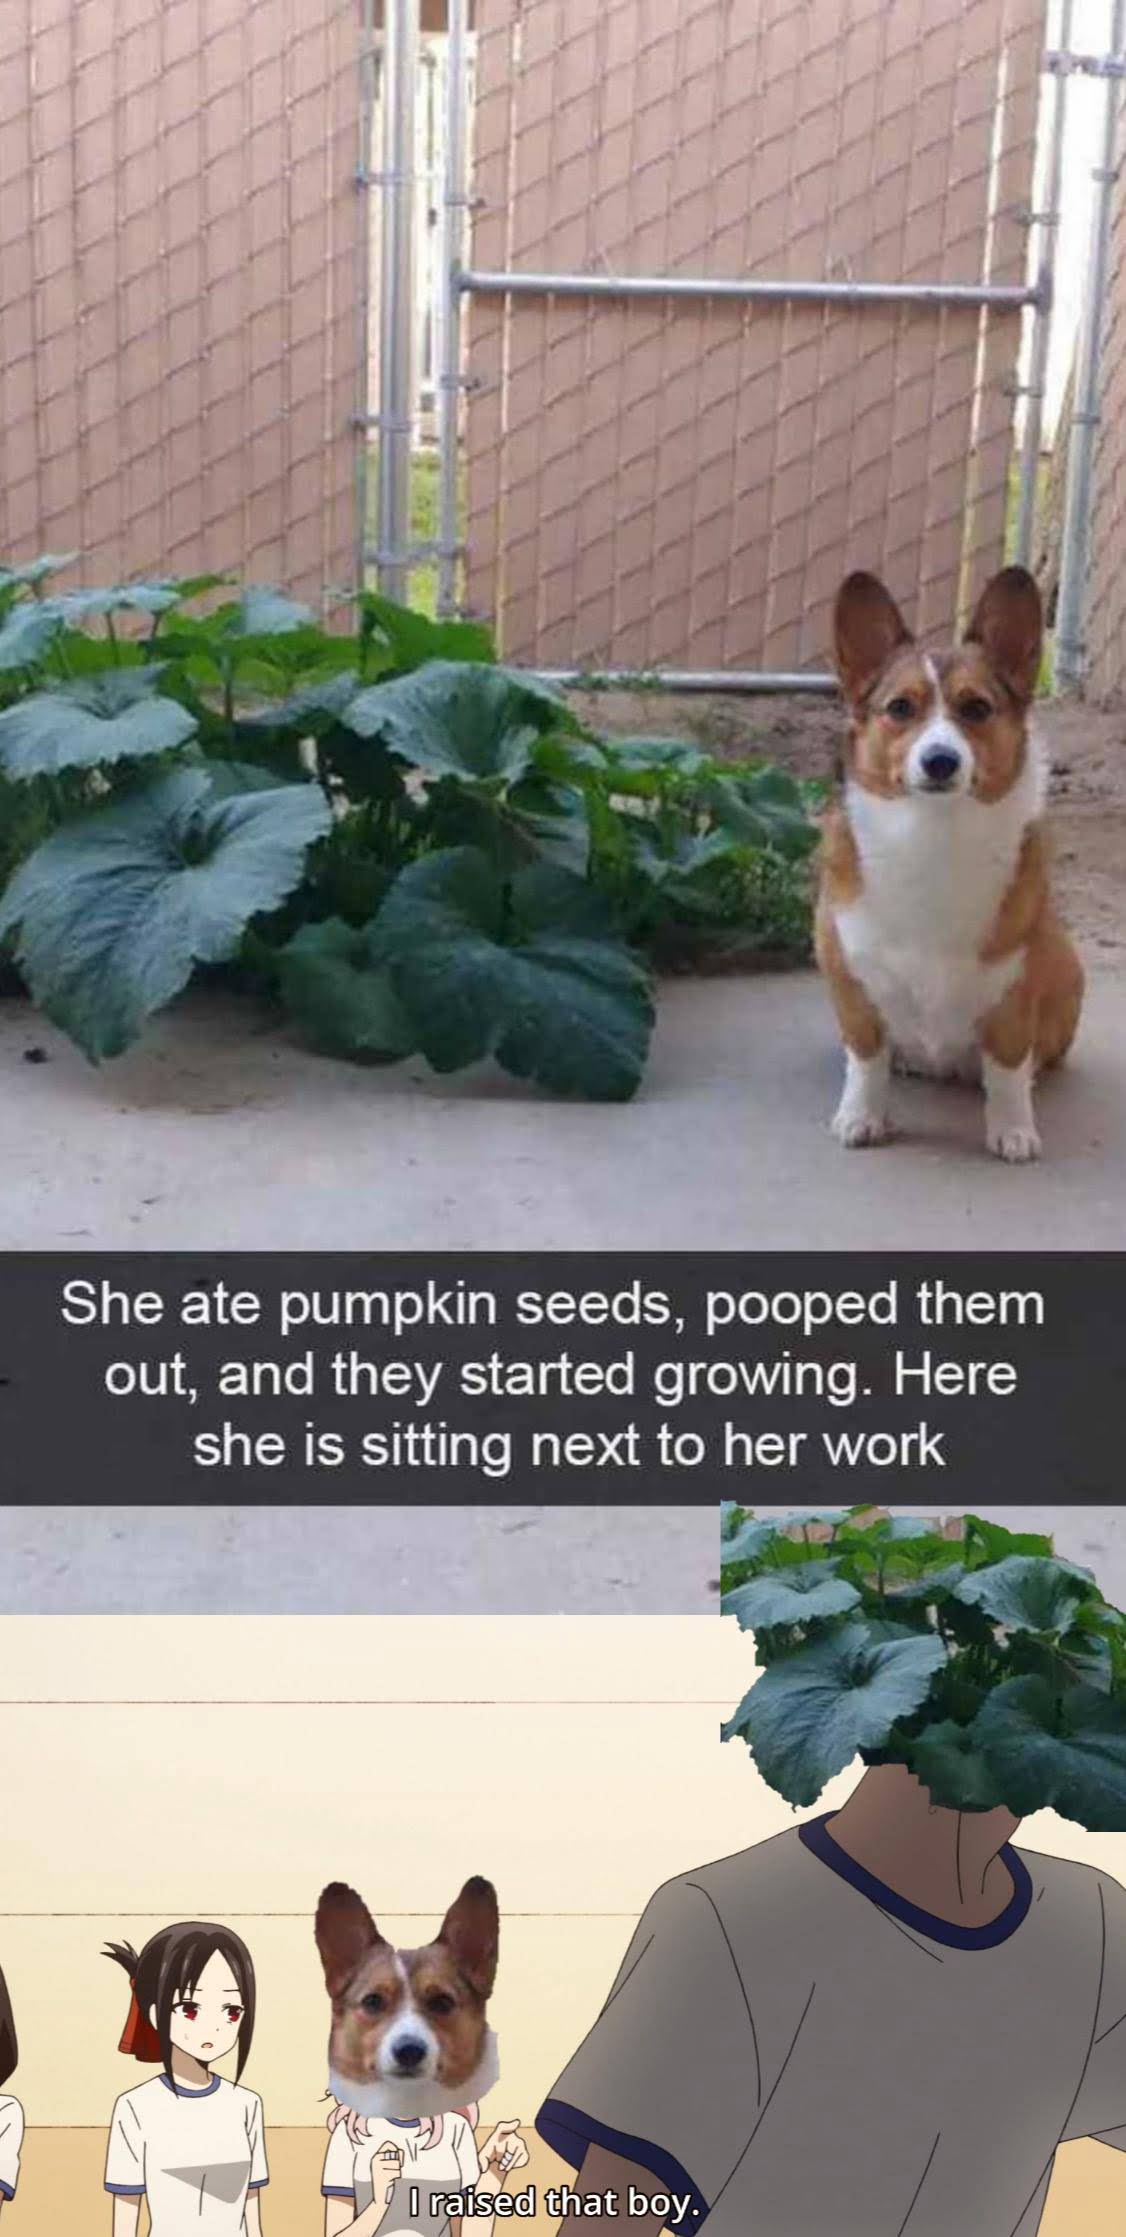 dank memes - dog ate pumpkin seeds - She ate pumpkin seeds, pooped them out, and they started growing. Here she is sitting next to her work I raised that boy.